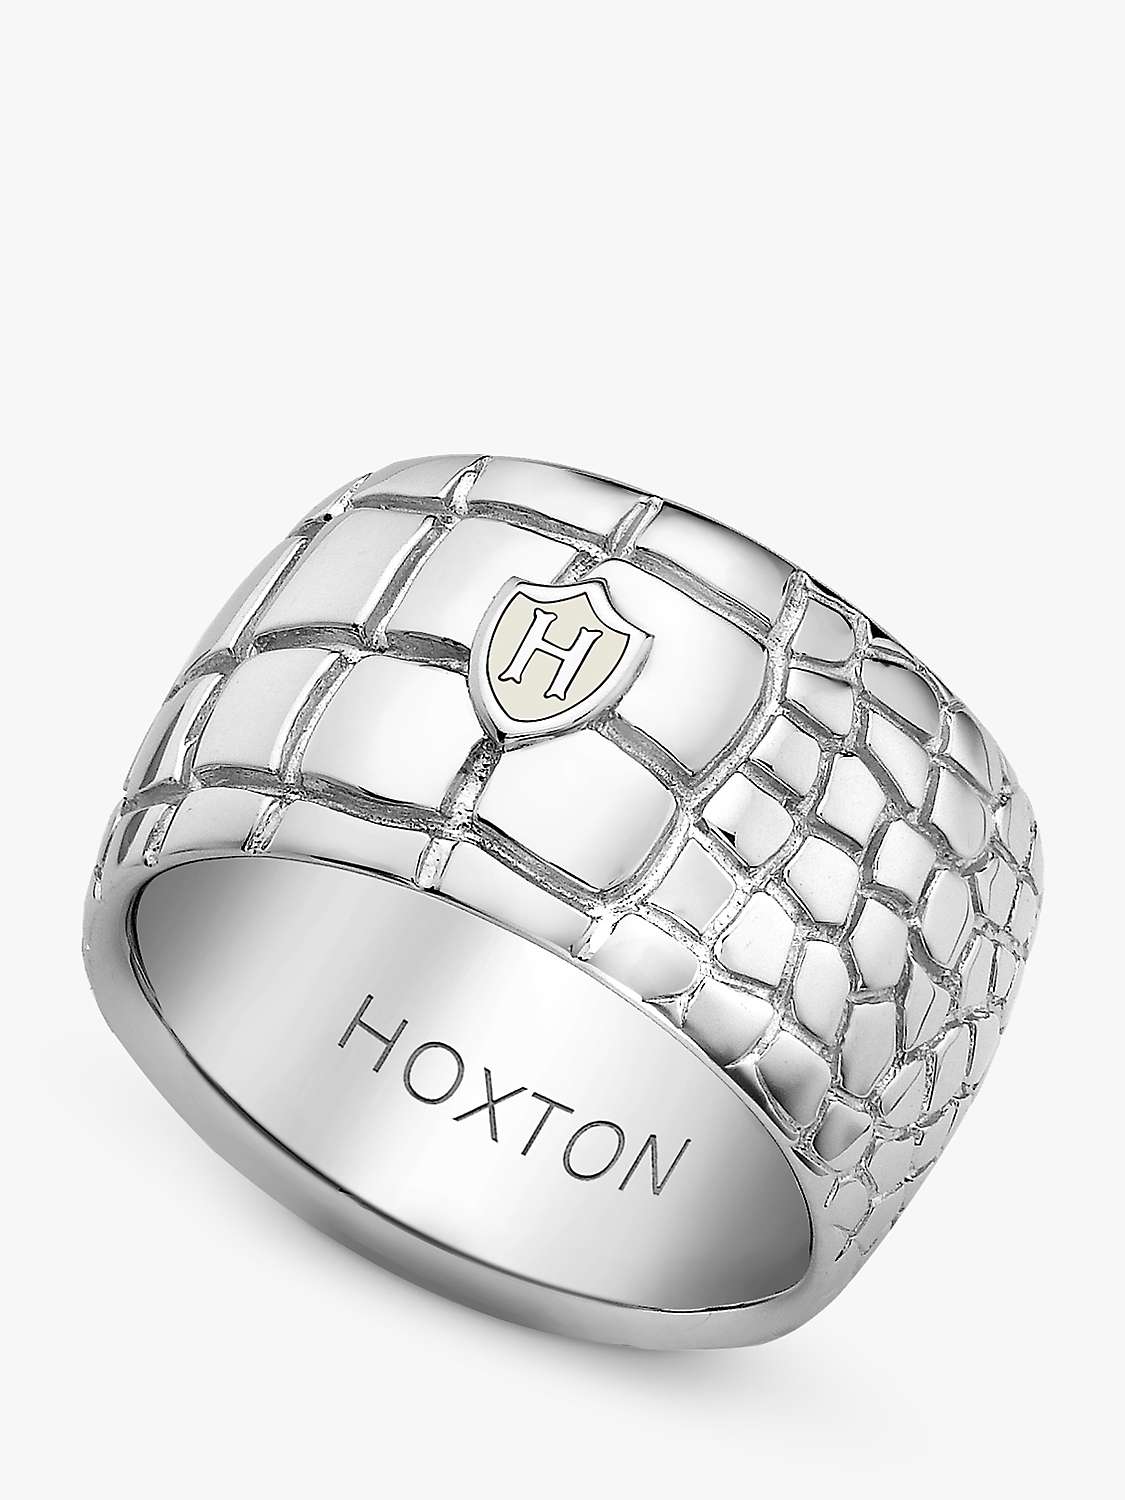 Buy Hoxton London Men's Wild Crocodile Patterned Ring, Silver Online at johnlewis.com